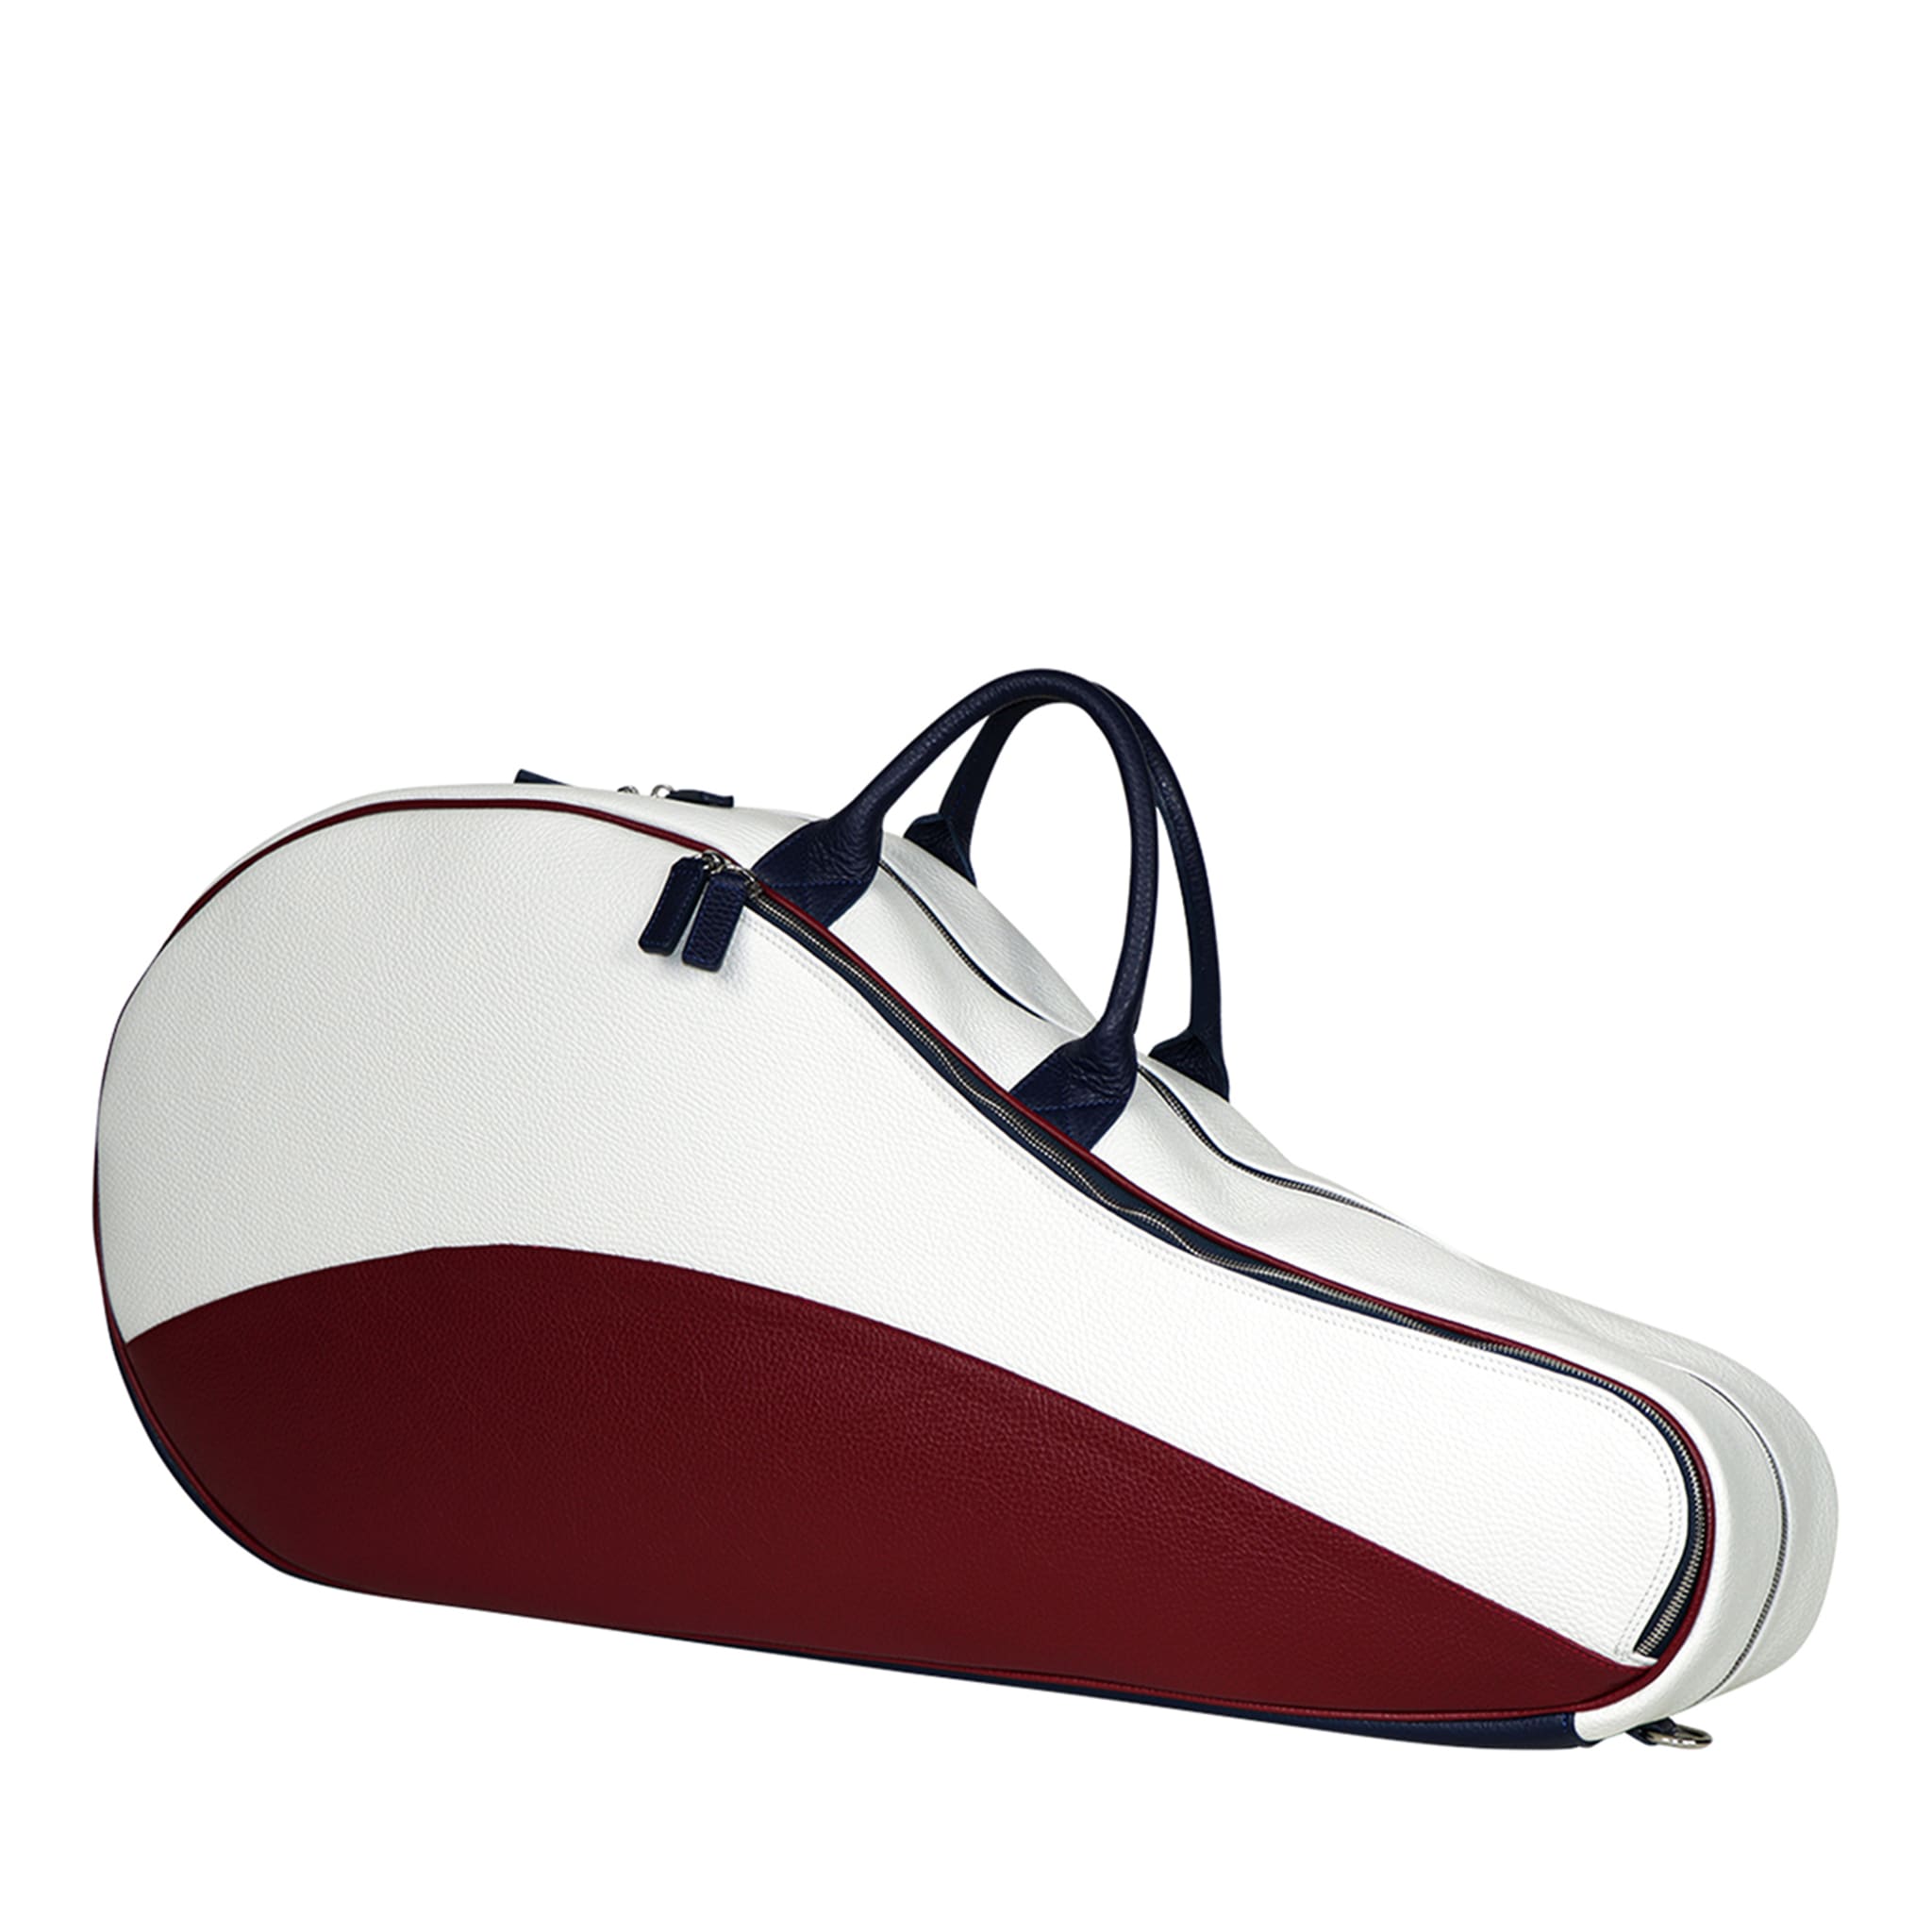 White, Red and Blue Tennis Bag - Main view